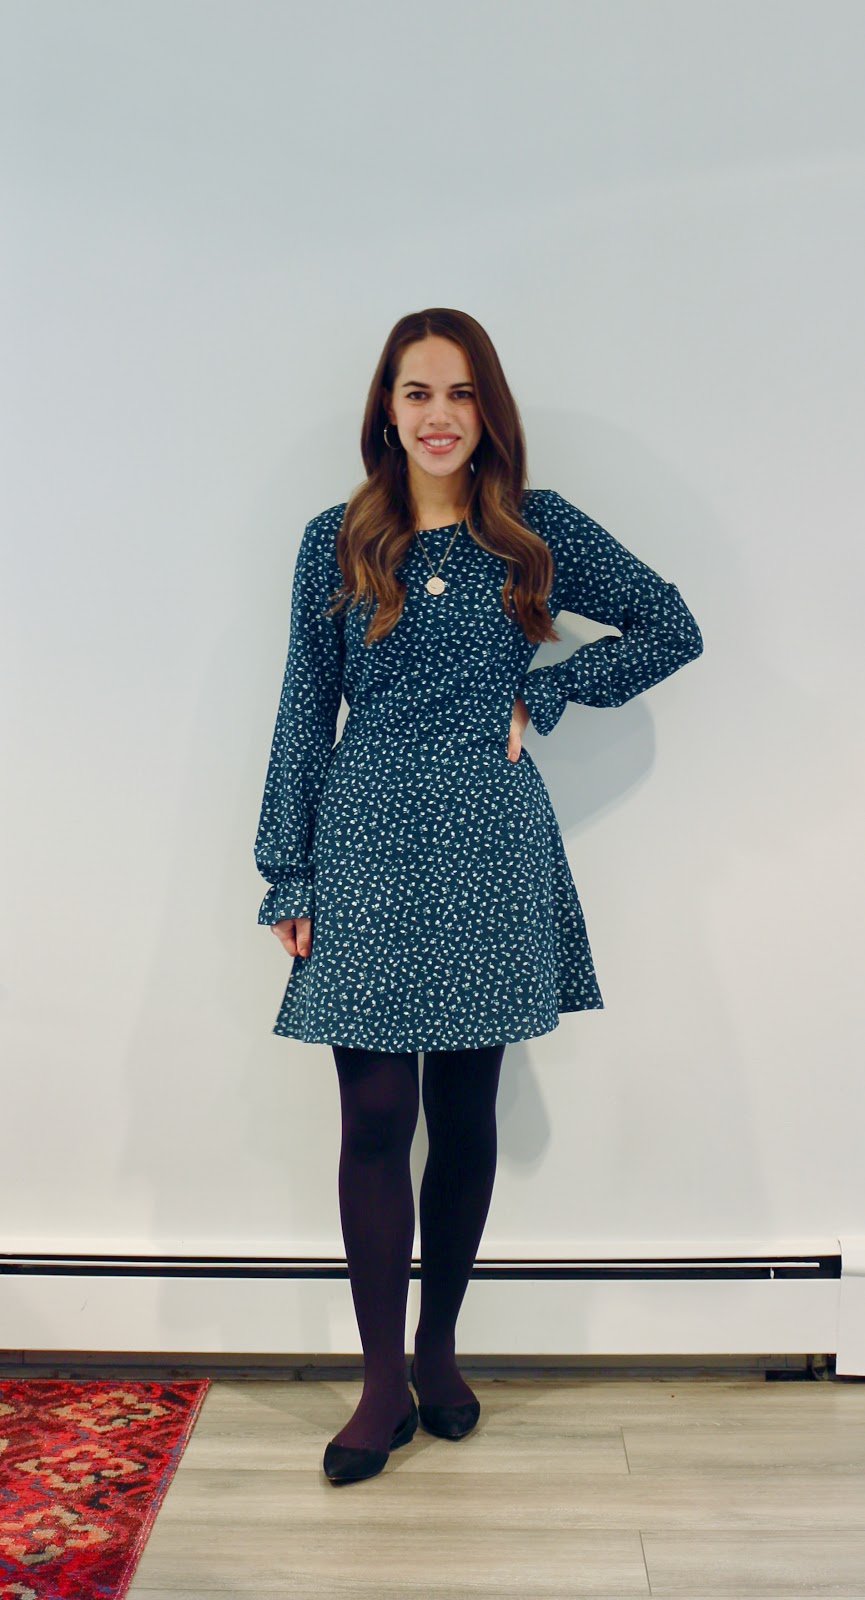 Jules in Flats - H&M Creped Dress (Business Casual Fall Workwear on a Budget)